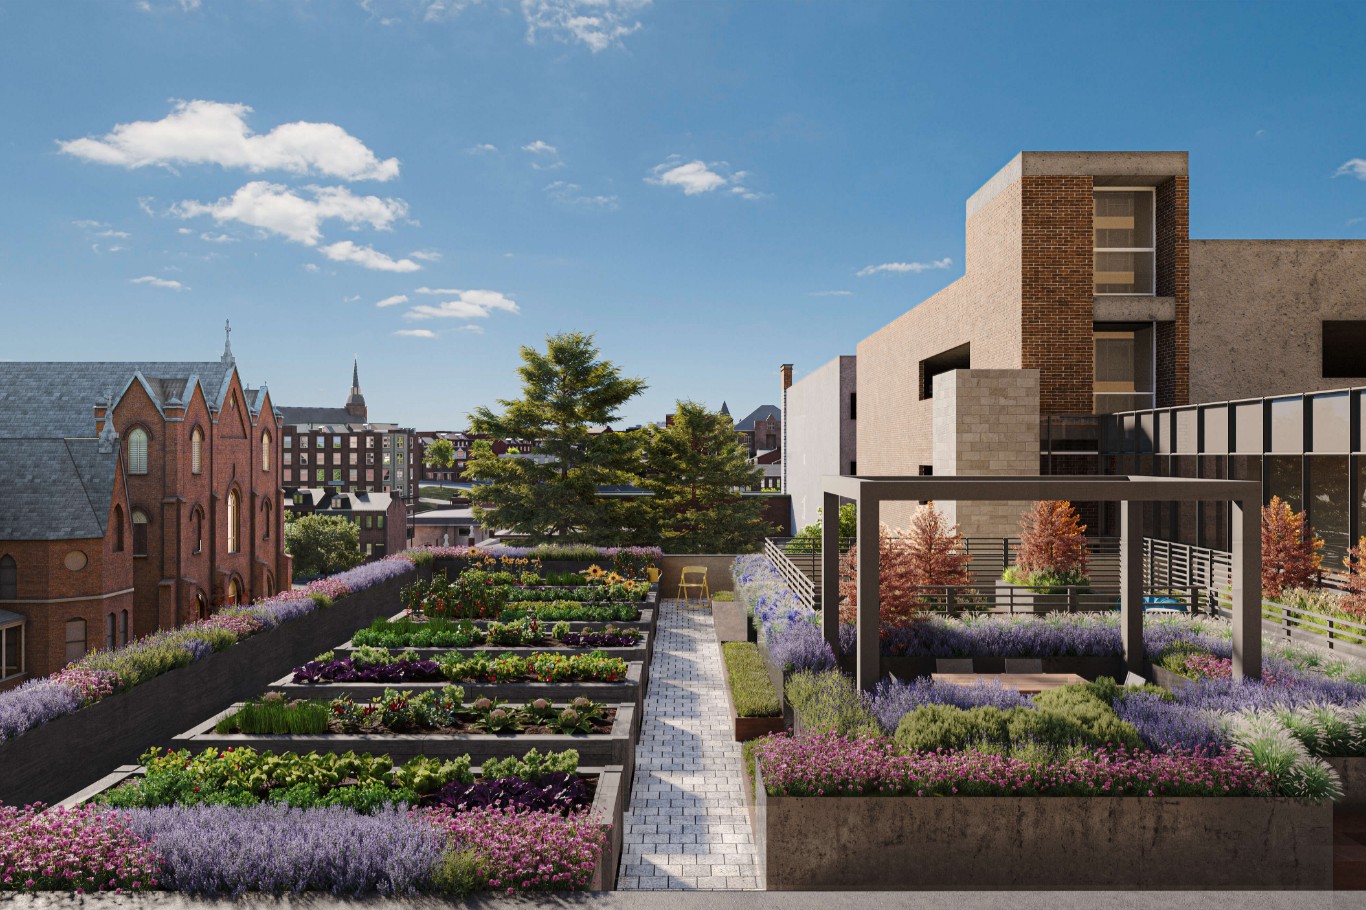 An artist's rendering of a rooftop garden designed for a 55+ retirement community.